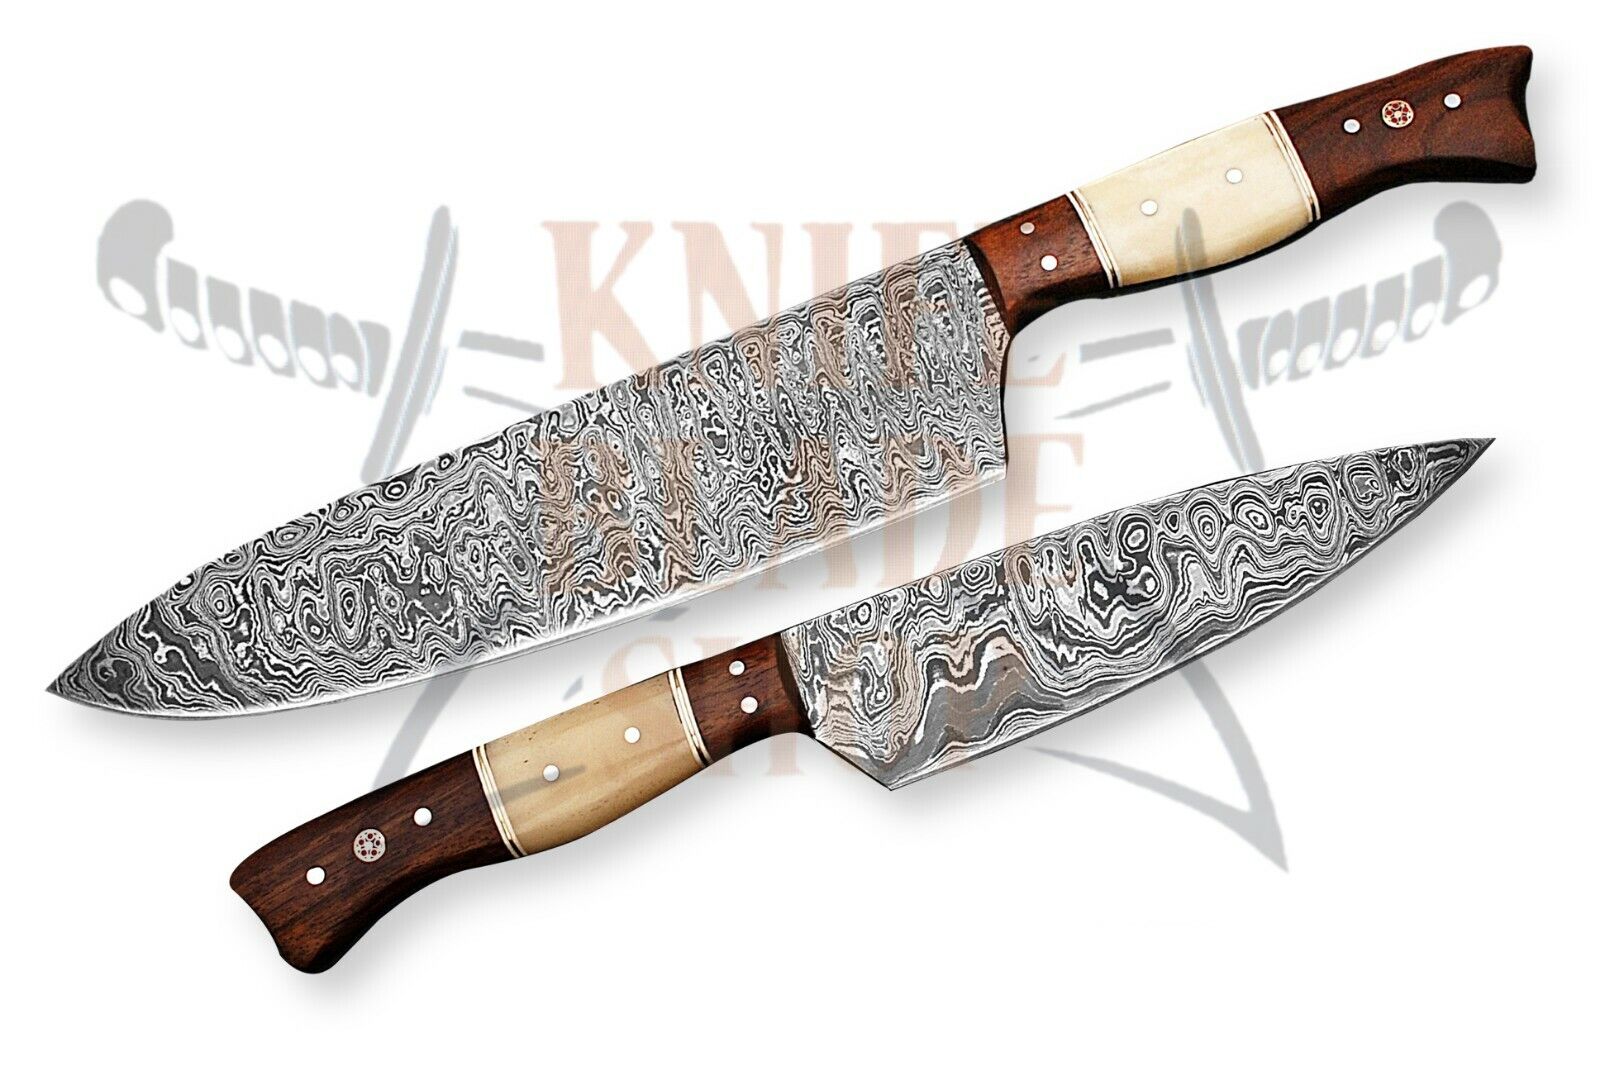 2 piece set of Damascus steel BLADE KITCHEN KNIVES/CHEF KNIVES BONE HANDLE